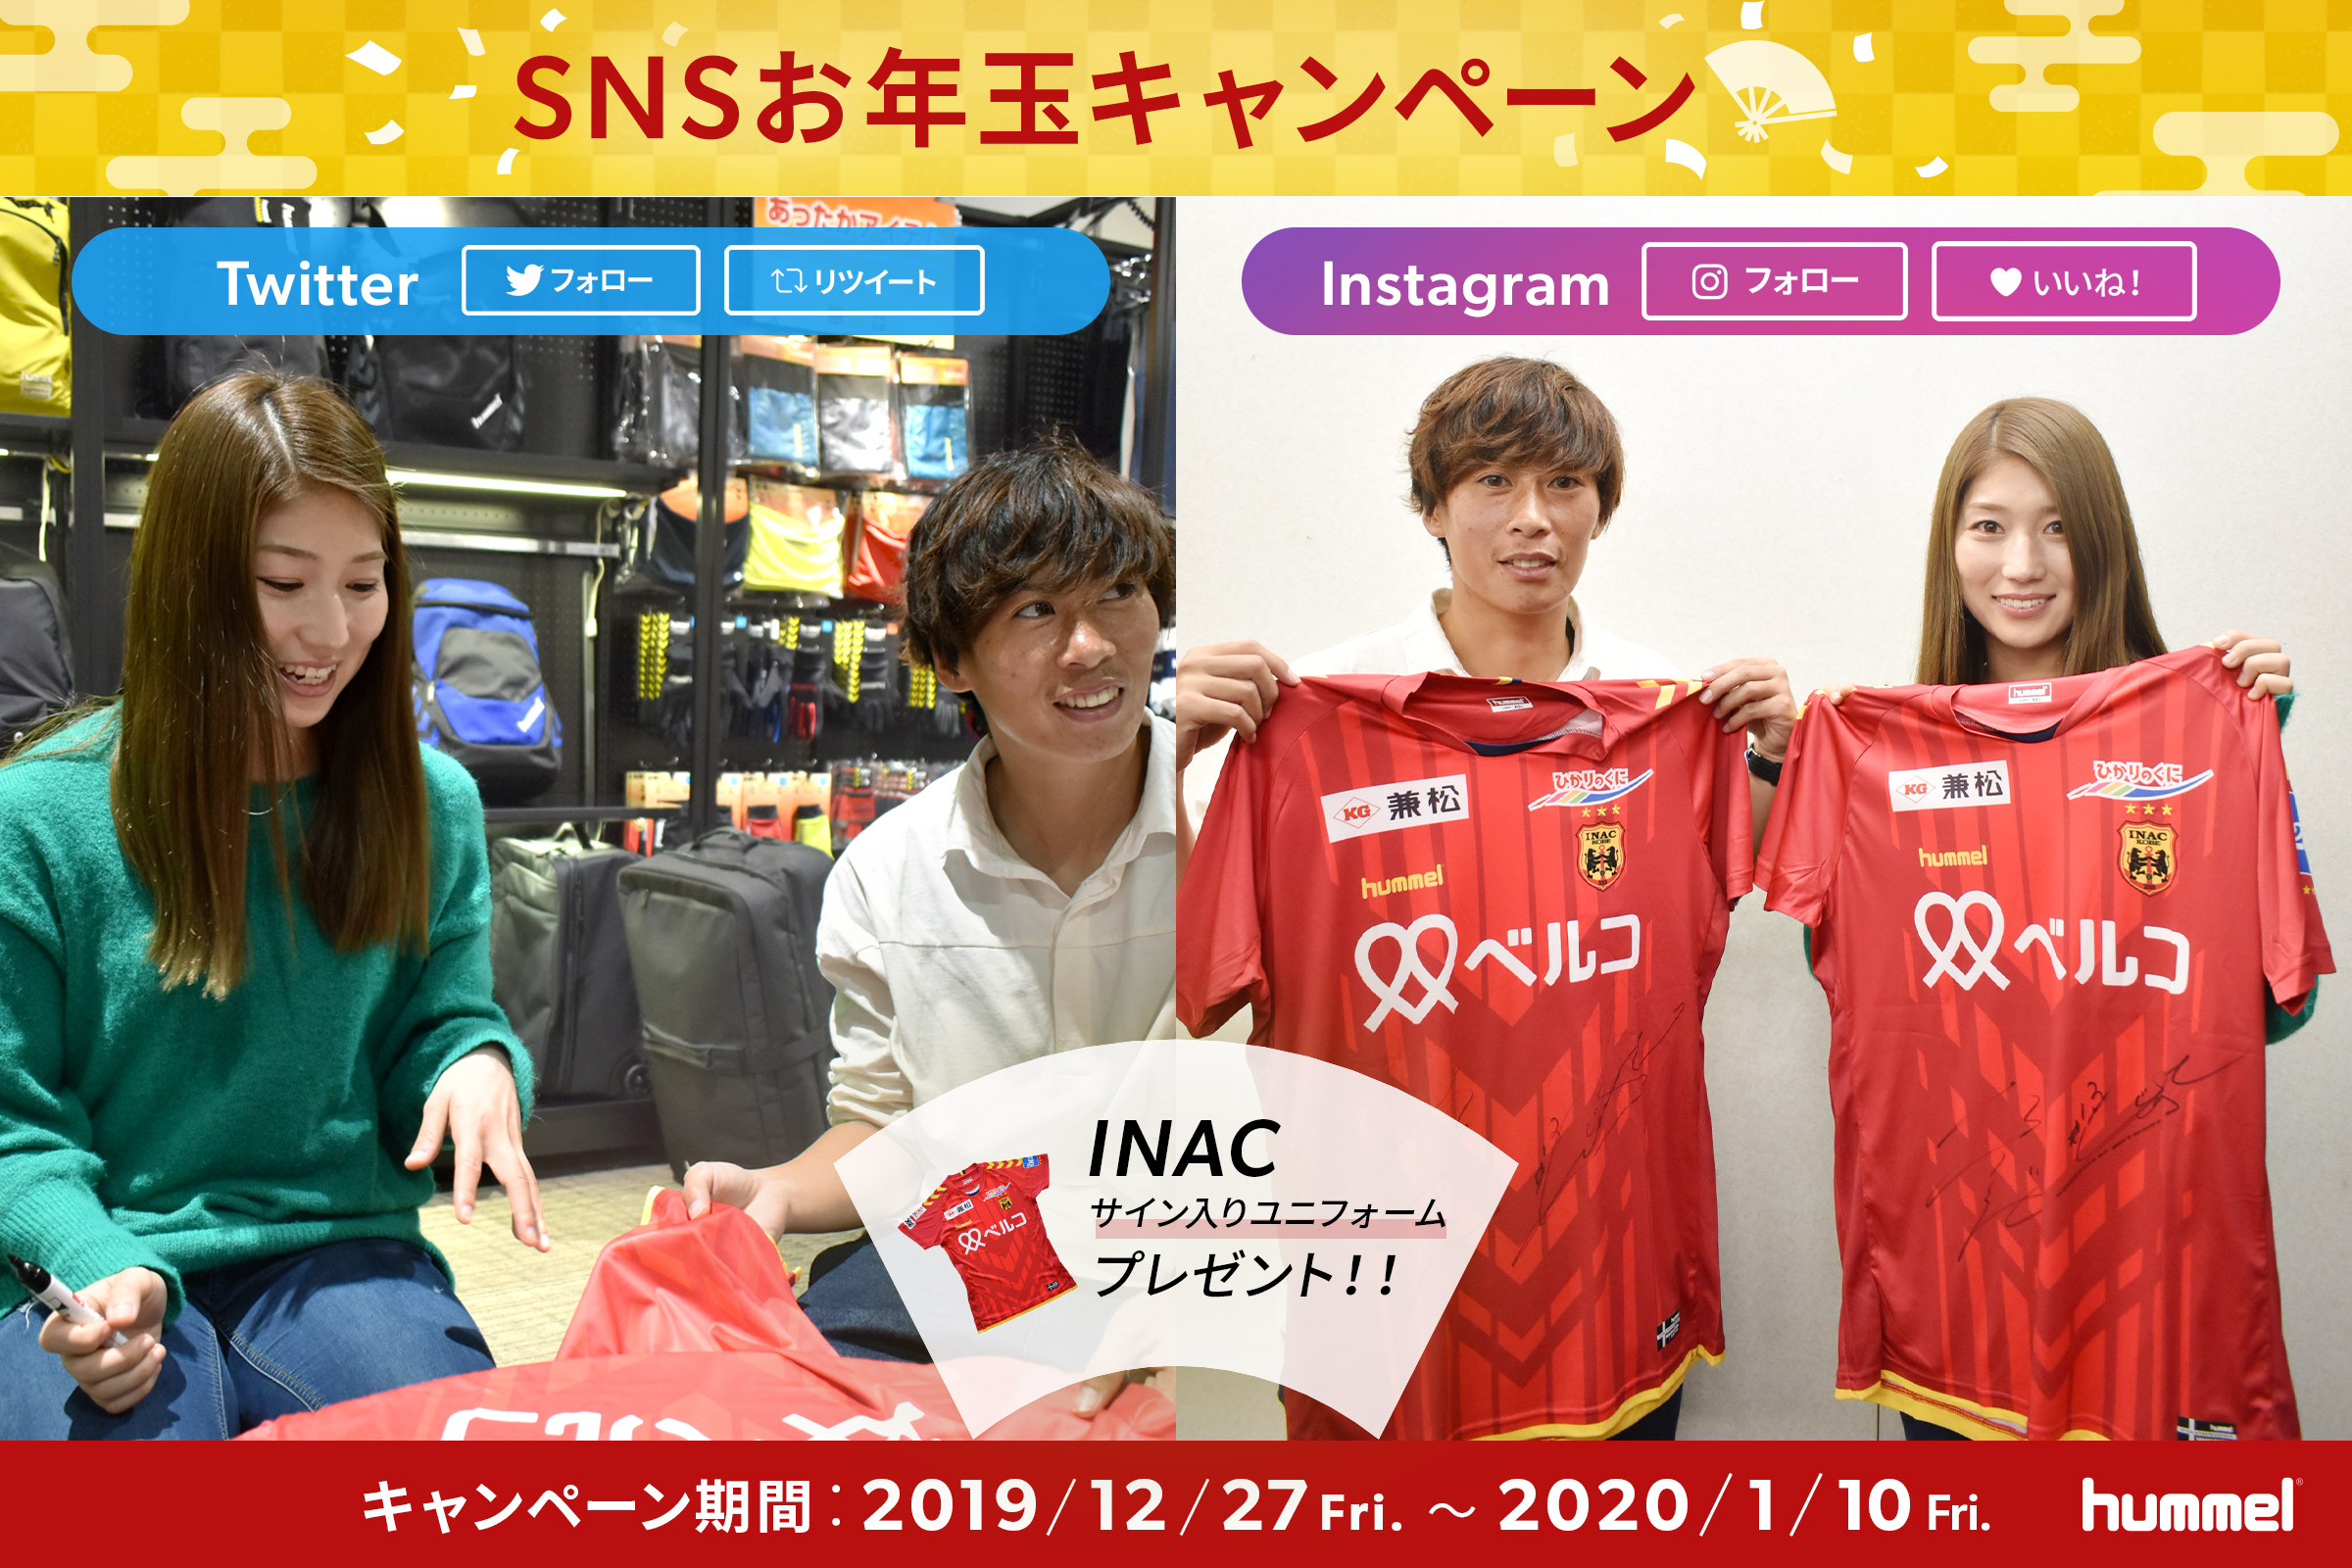 Snsお年玉キャンペーン サイン入りinacユニプレゼント Hummel Official Web Site